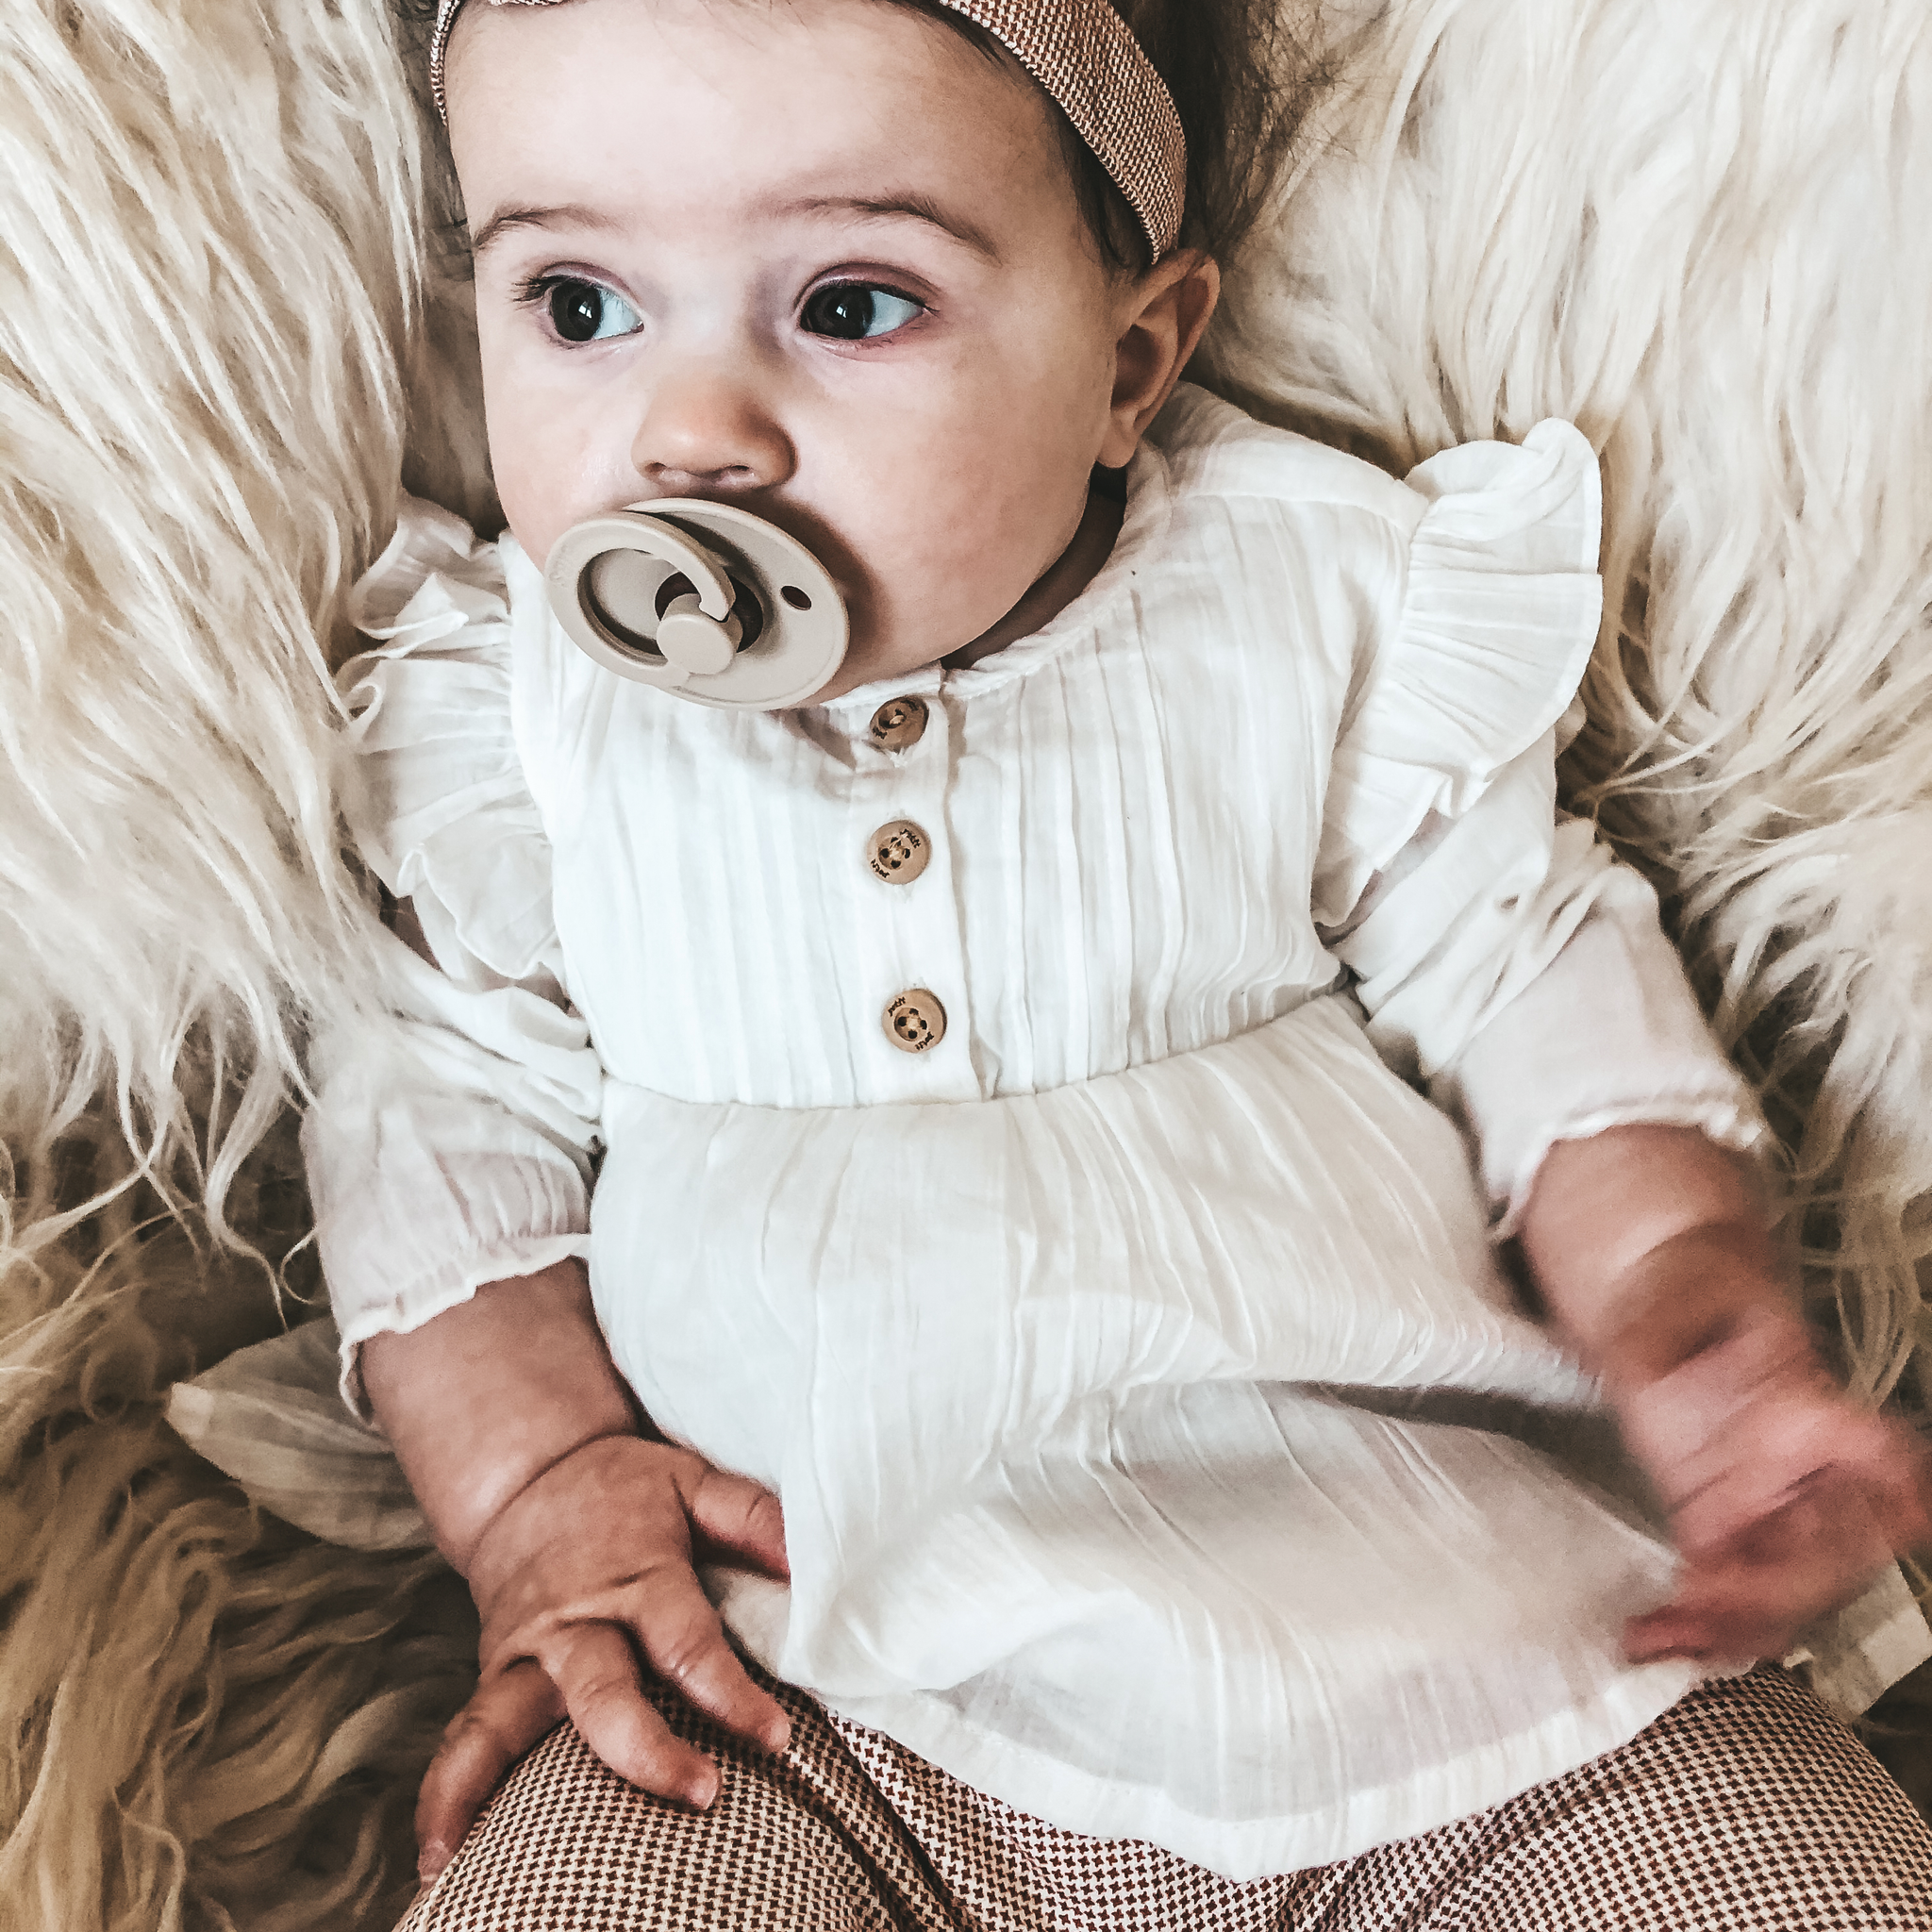 BELLE baby blouse